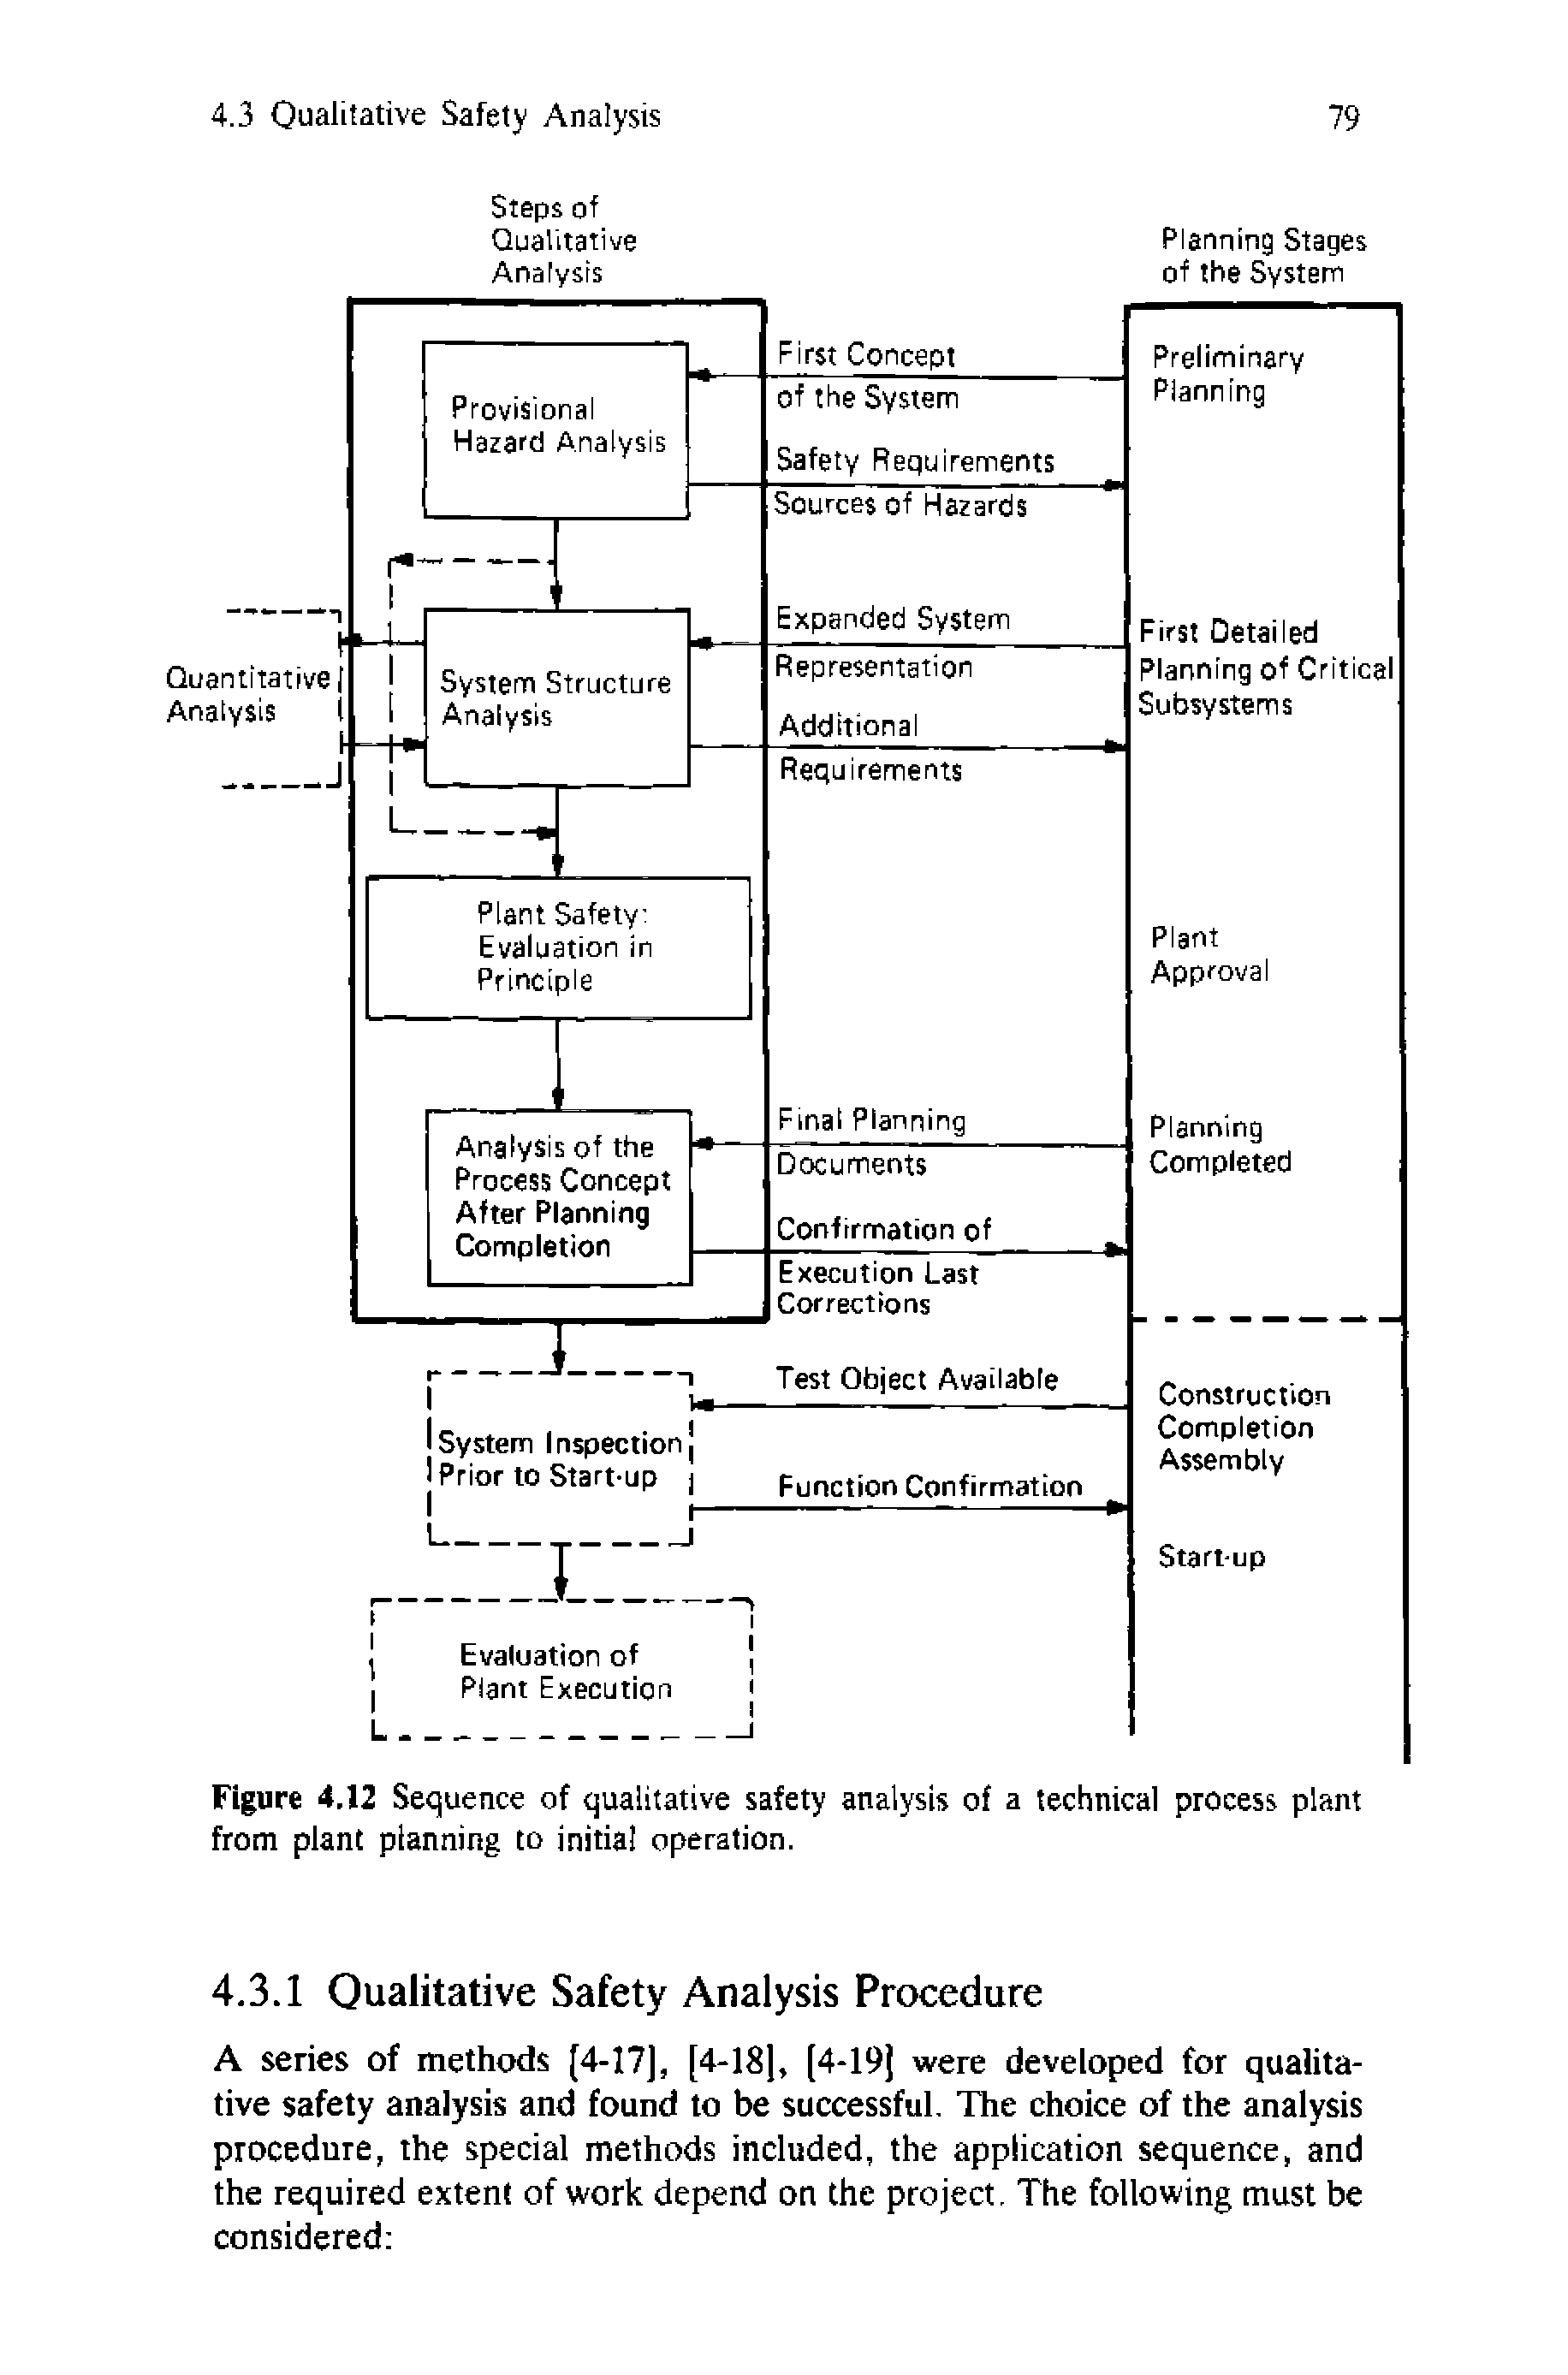 Figure 4.12 Sequence of qualitative safety analysis of a technical process plant from plant planning to initial operation.